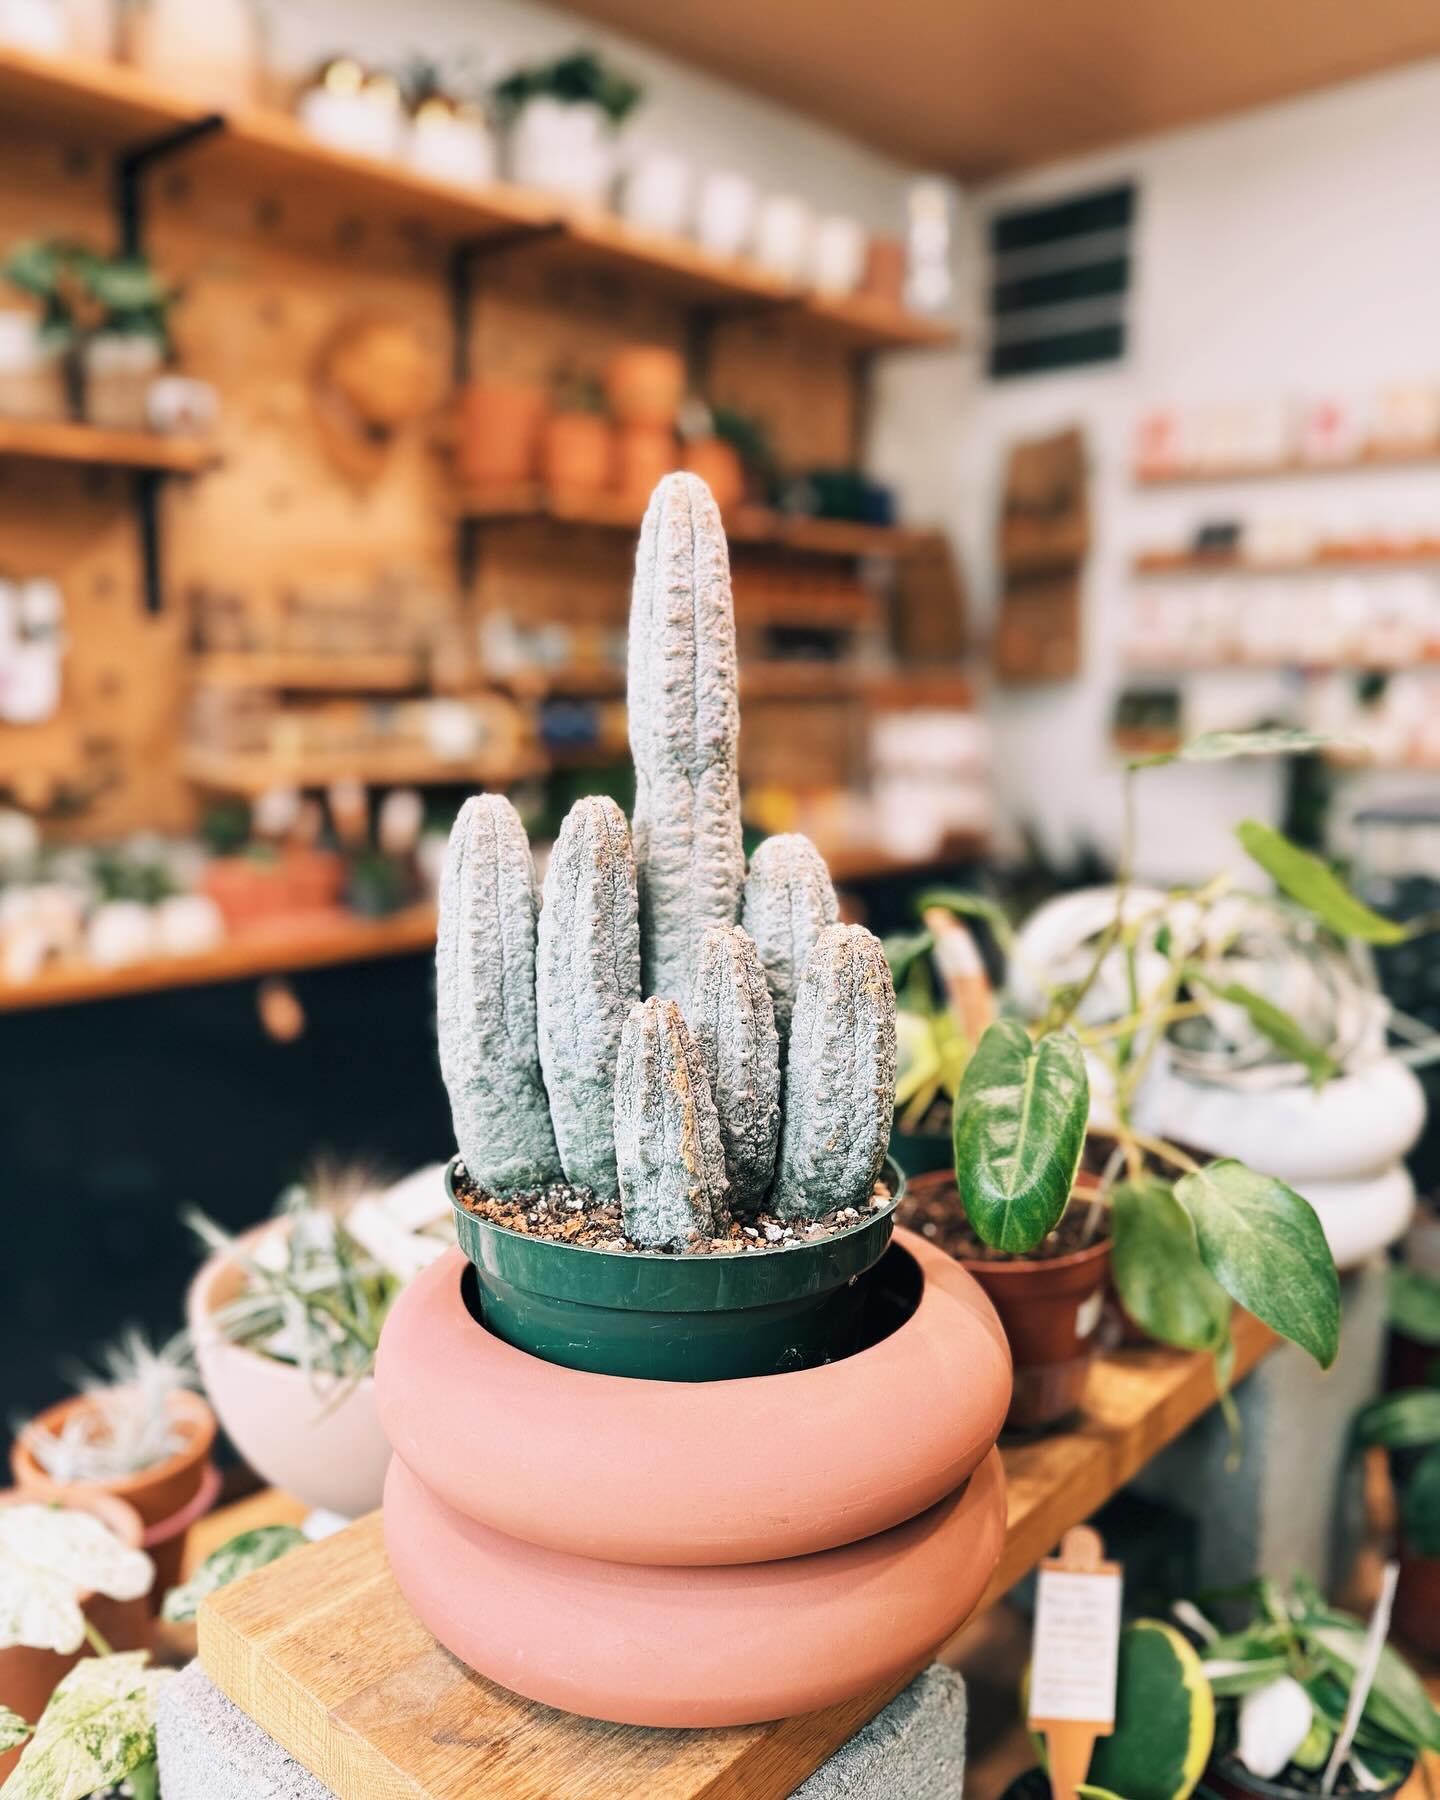 We&rsquo;ve got one of our fave plants in the shop rn. Euphorbia abdelkuri. It&rsquo;s so weird and goofy and we love it. 

The shop will open a bit late today, we should be there around 1. See you then!